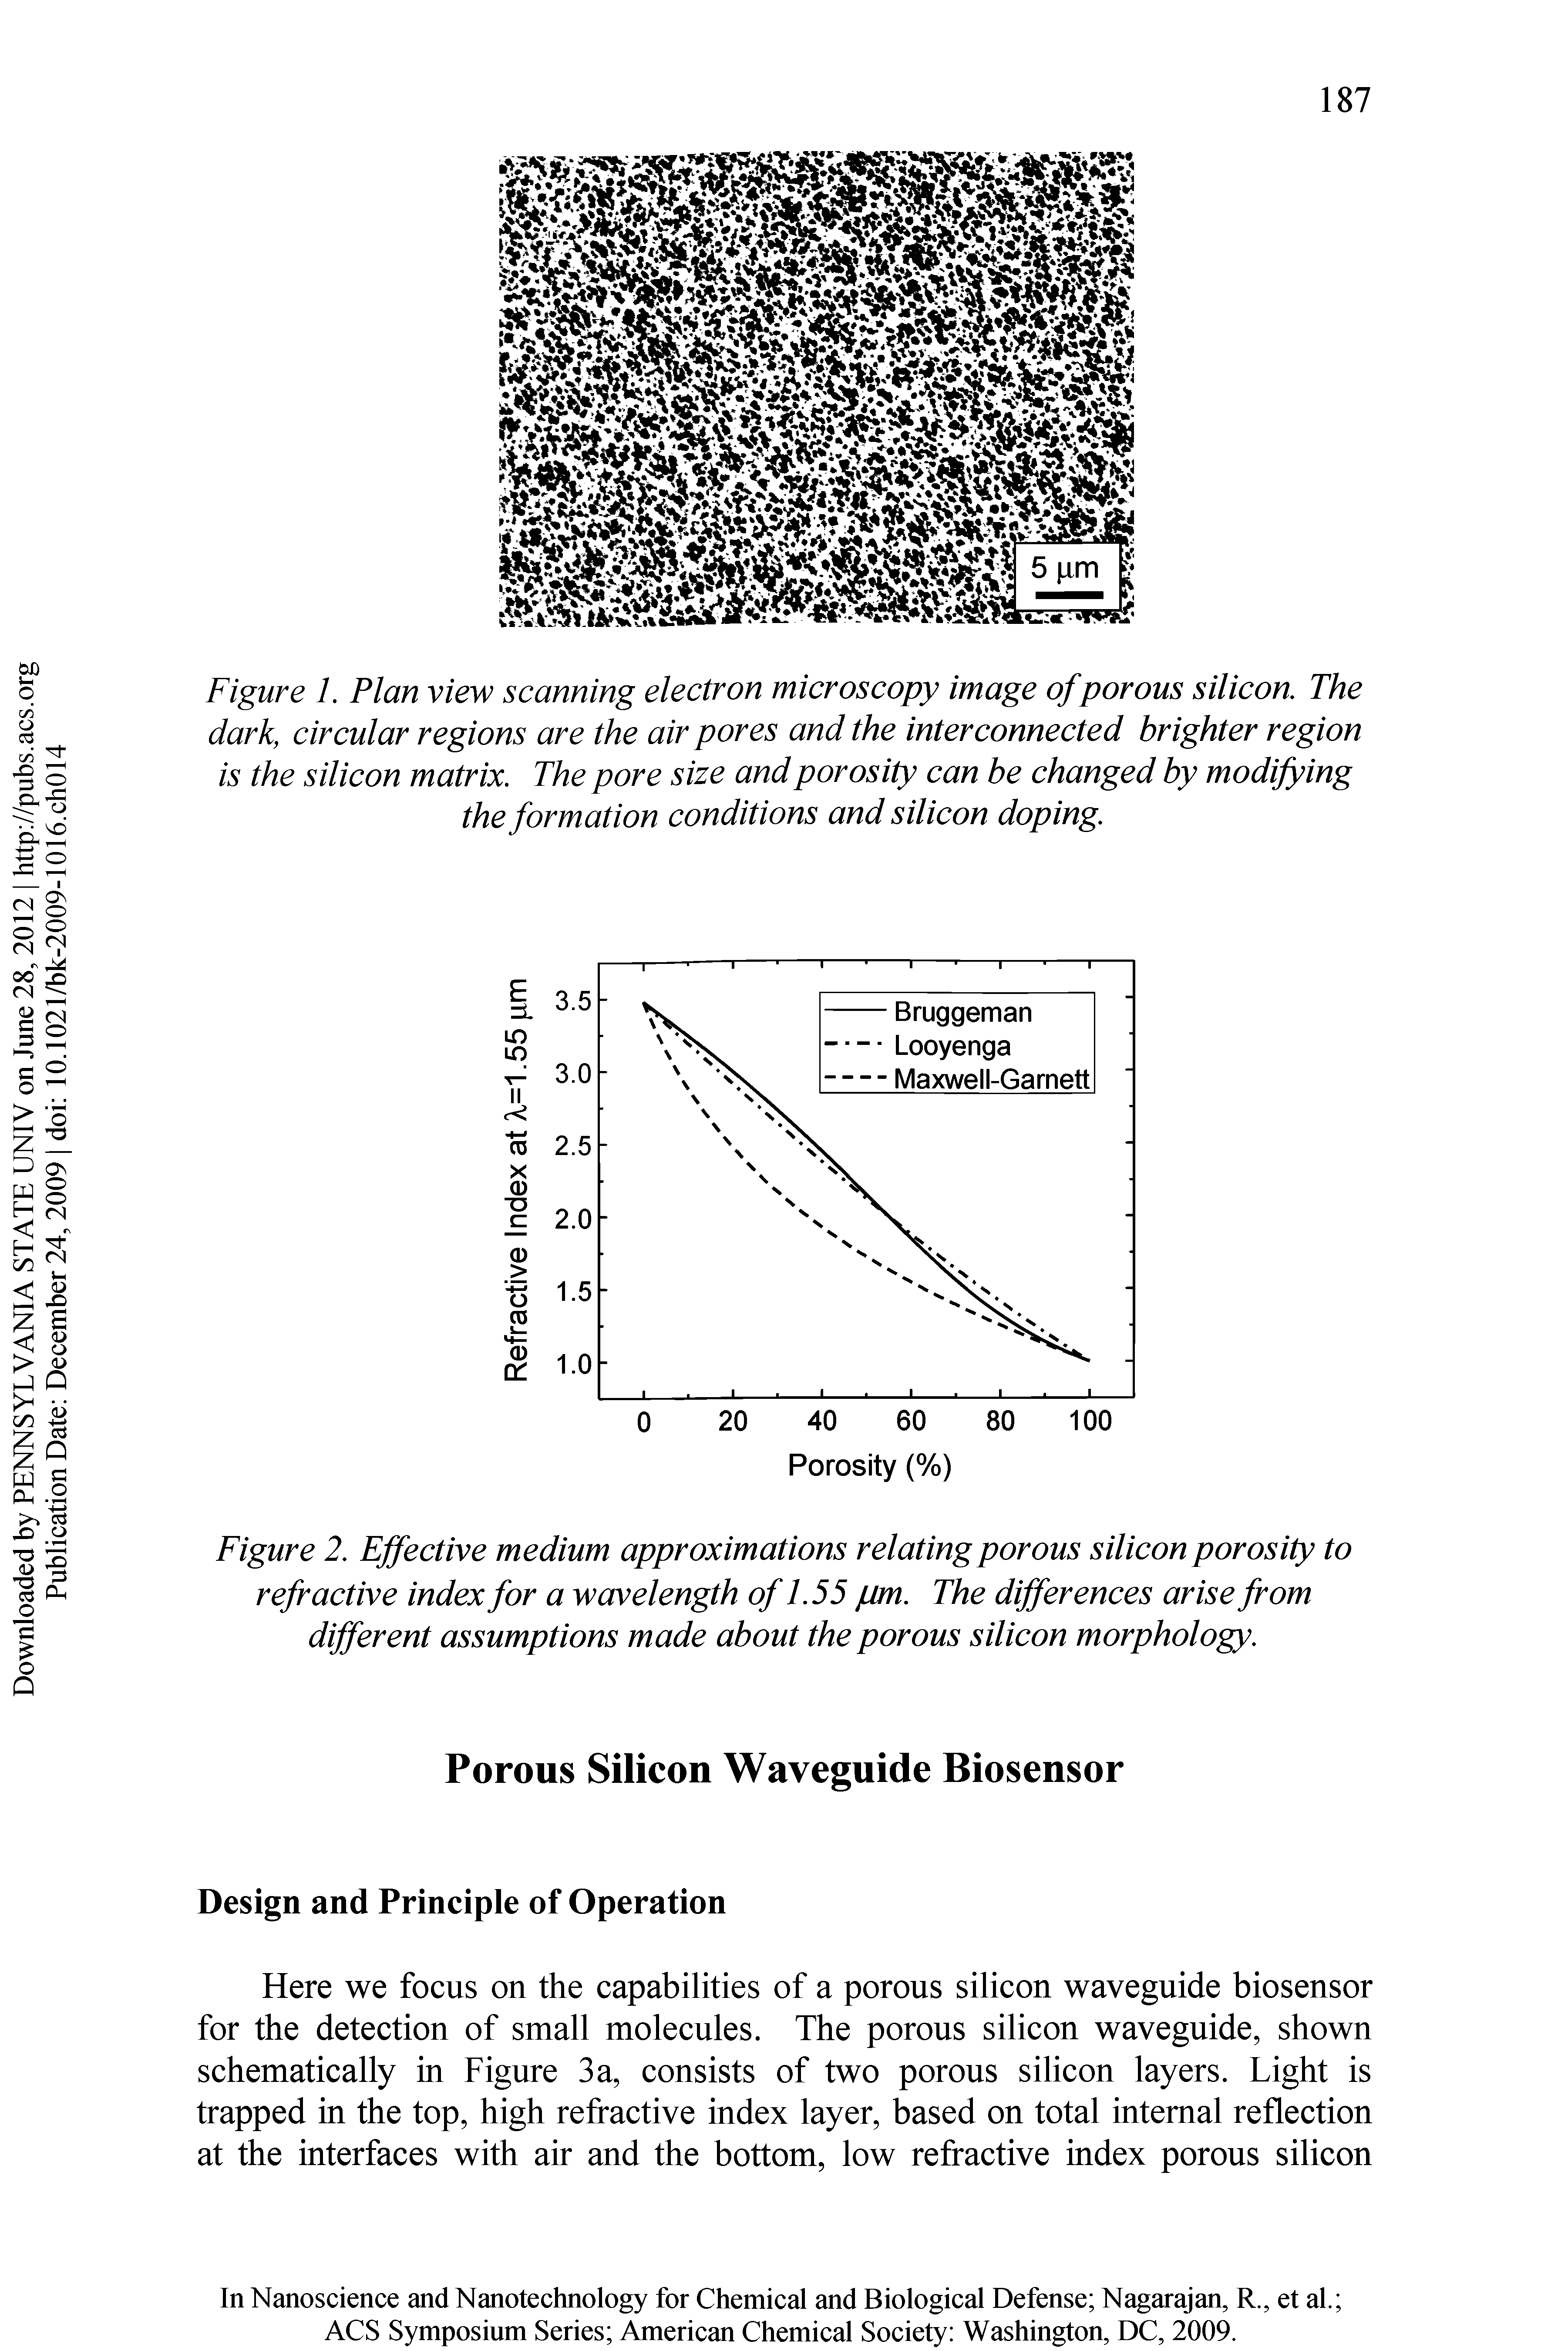 Figure 2. Effective medium approximations relating porous silicon porosity to refractive index for a wavelength of 1.55 /am. The differences arise from different assumptions made about the porous silicon morphology.